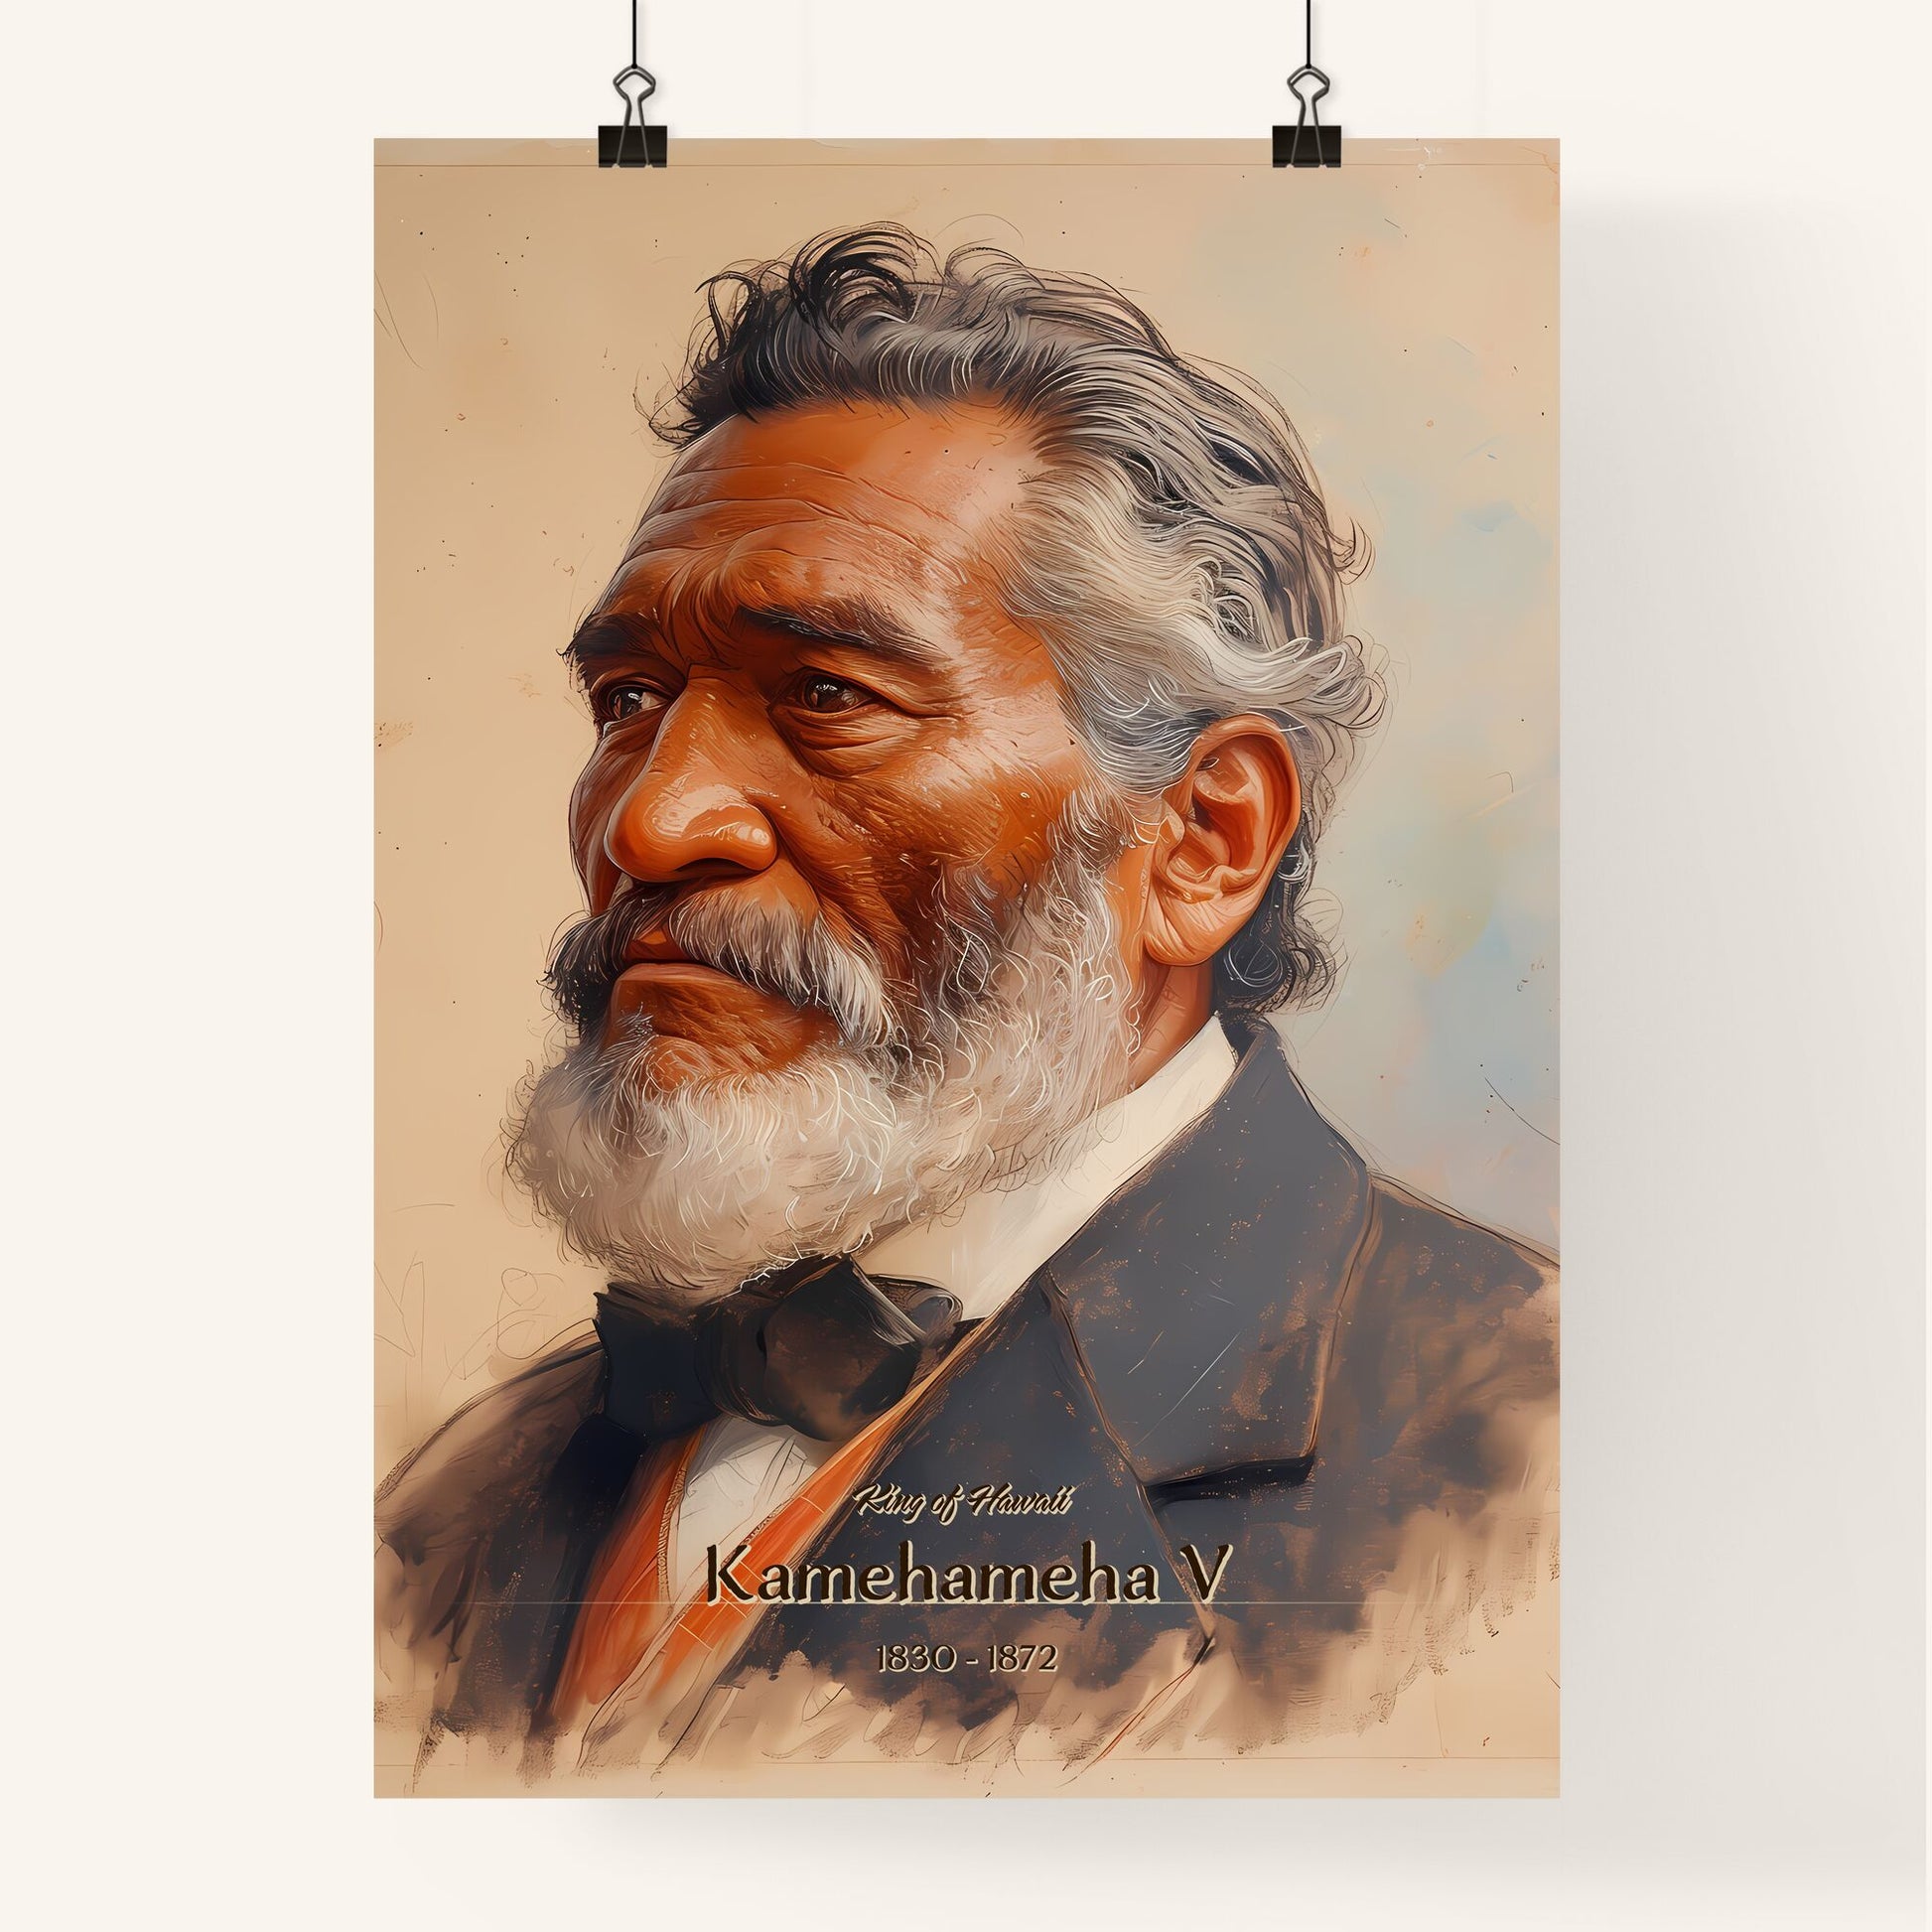 King of Hawaii, Kamehameha V, 1830 - 1872, A Poster of a painting of a man with a beard Default Title